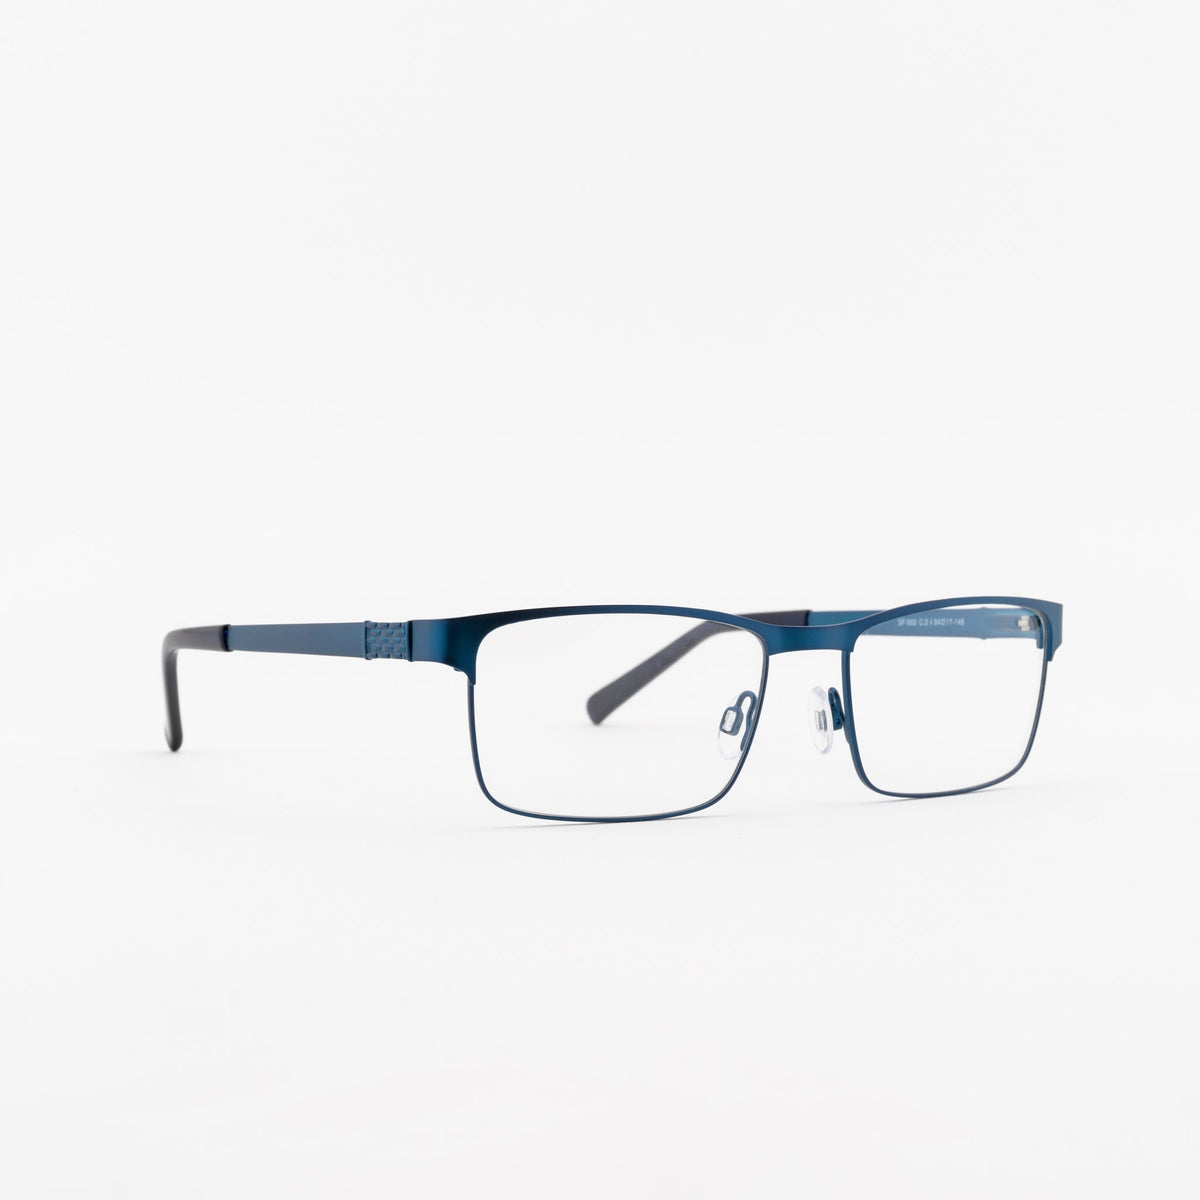 SF-502 Frames Superflex 54 C2 - NAVY Not Available